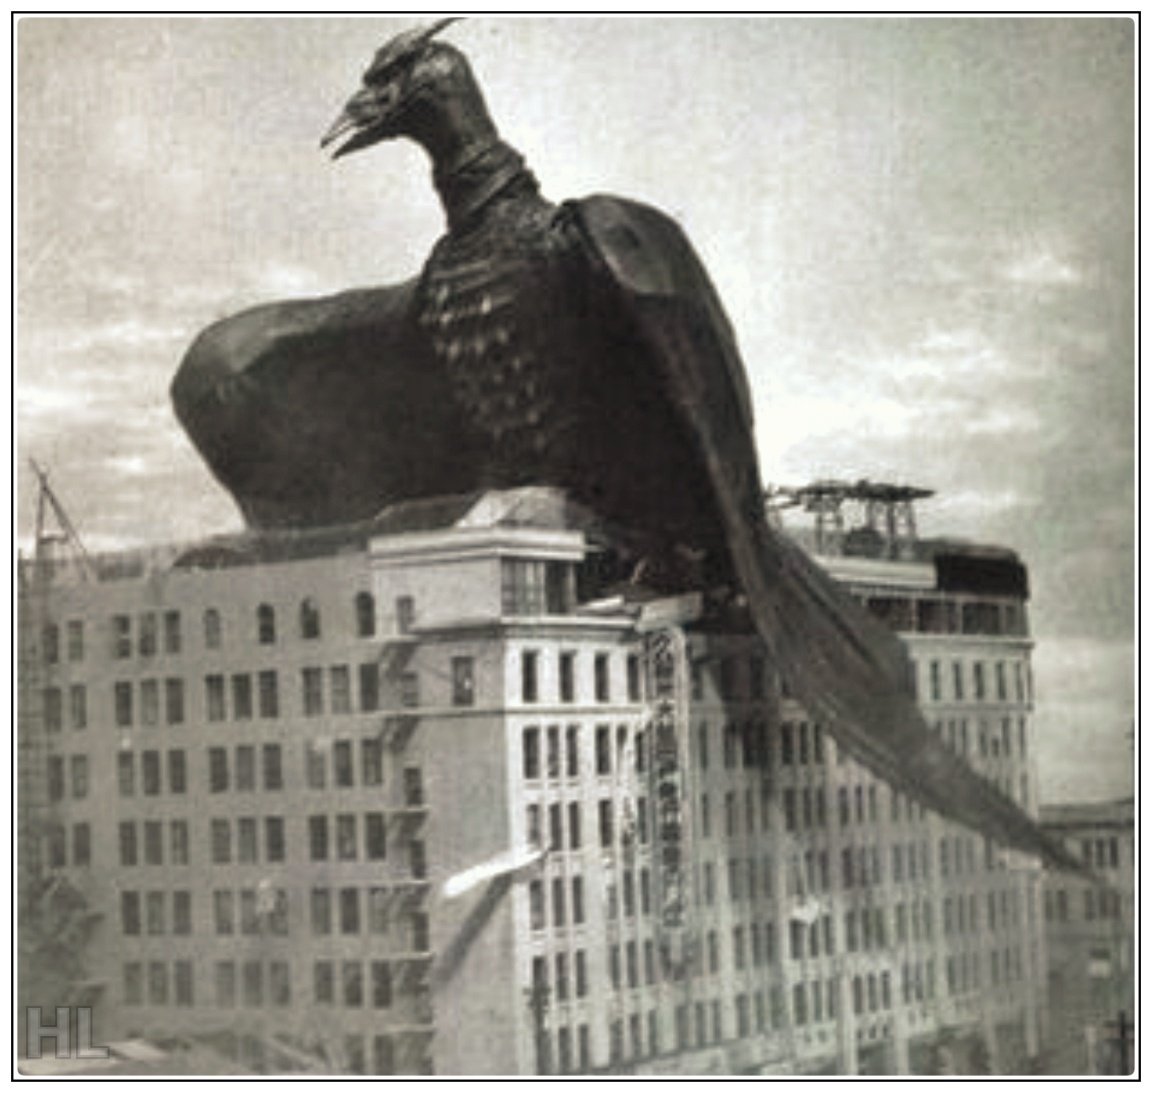 A rare photograph of one of the last magnificent Liverbirds before they were hunted to extinction in the late 1920s.